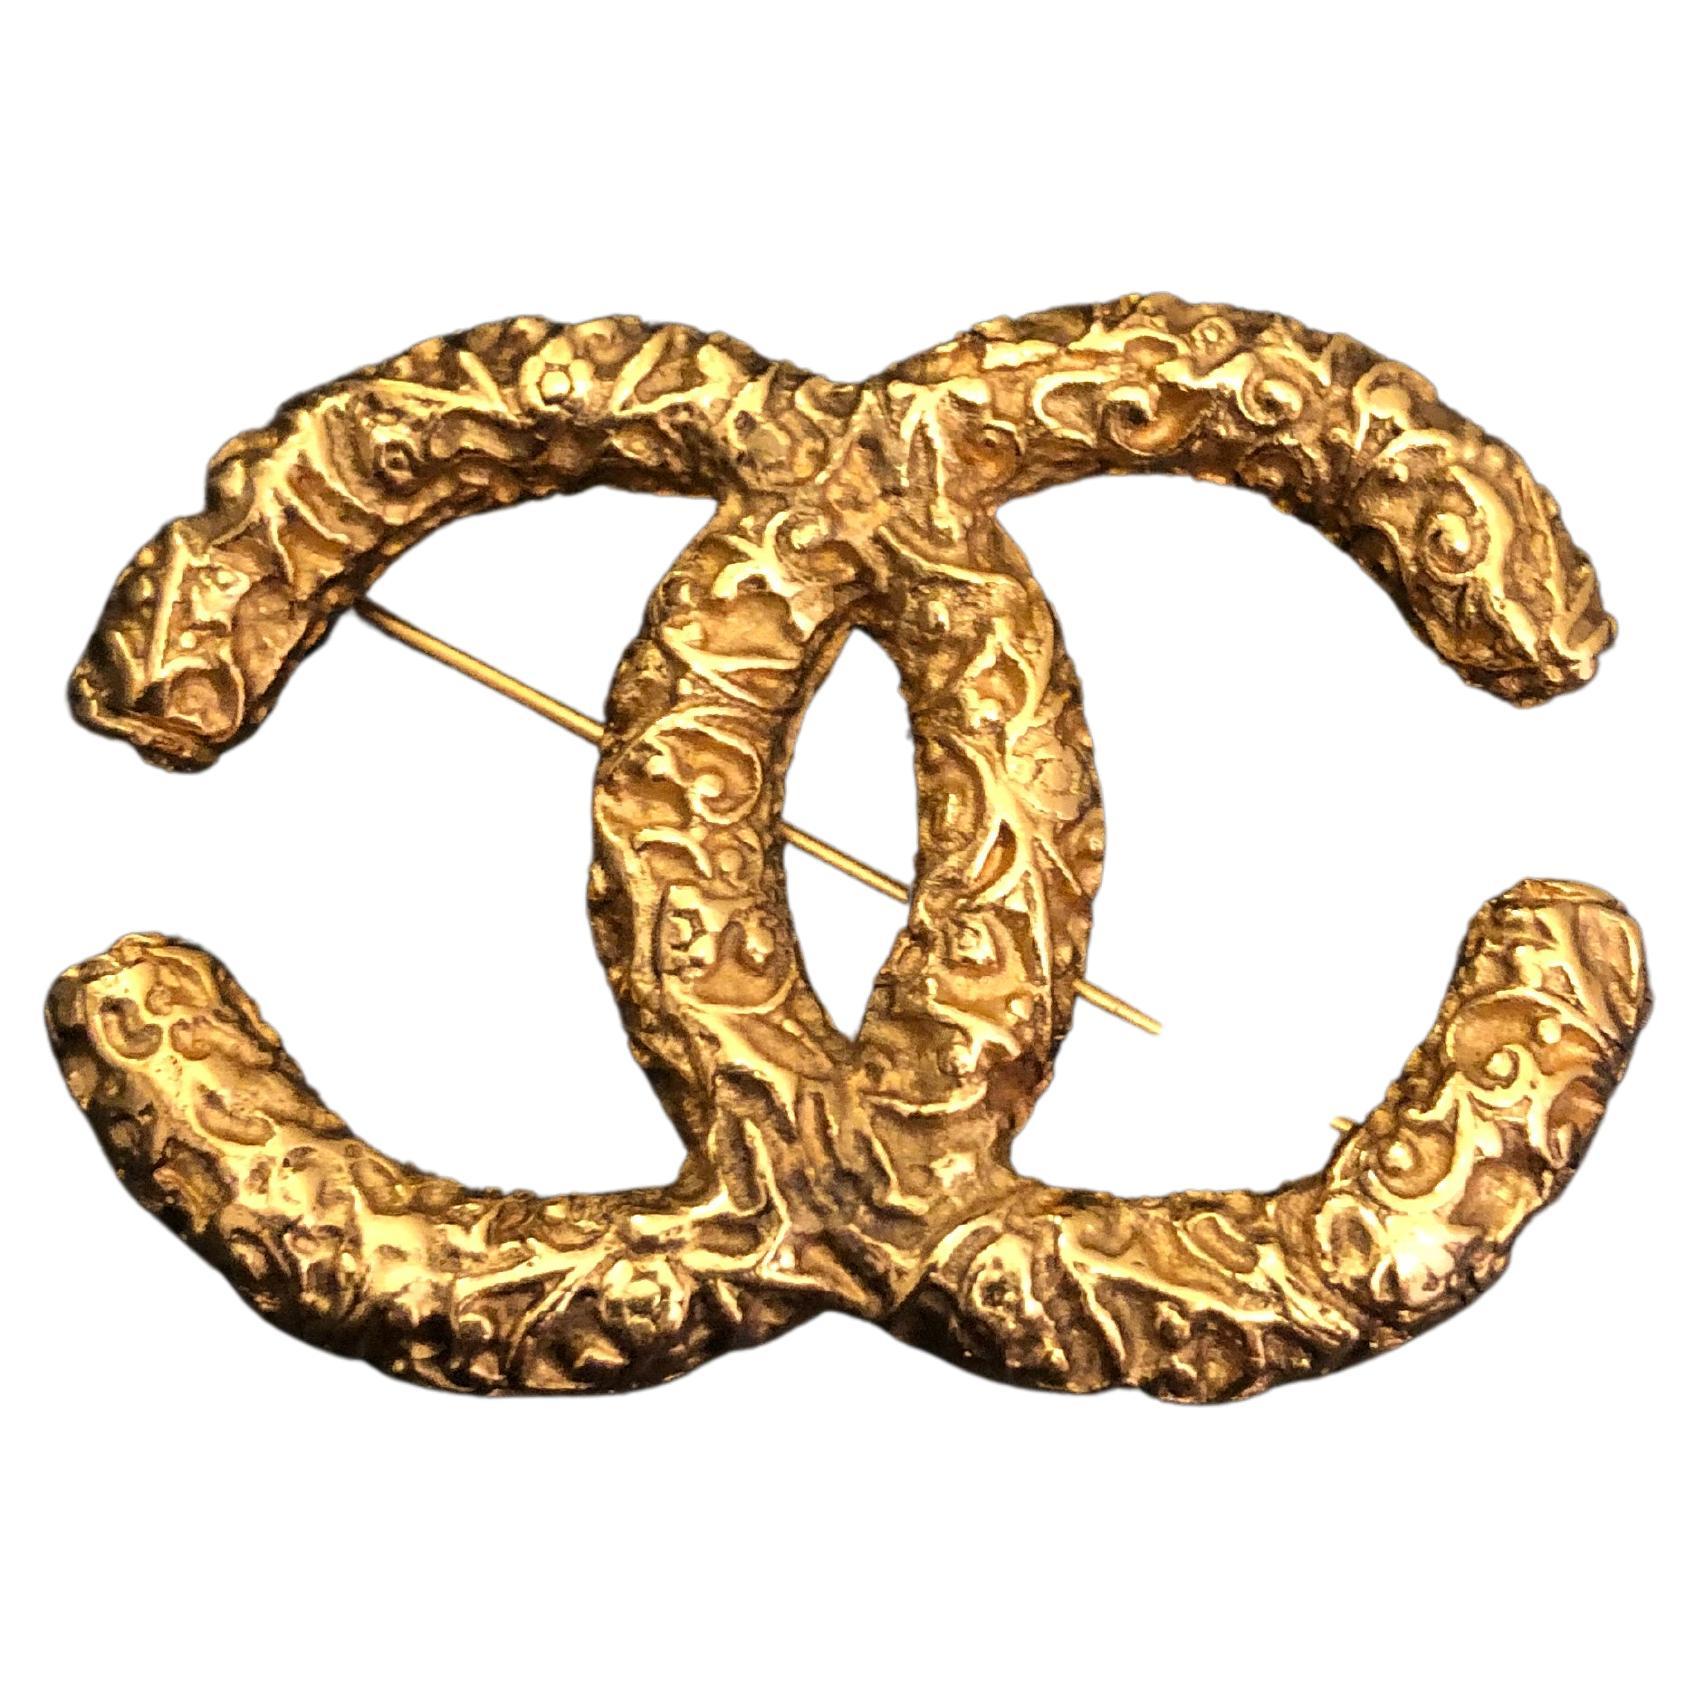 1993 Vintage CHANEL Gold Toned Floral Textured CC Chain Brooch 93A